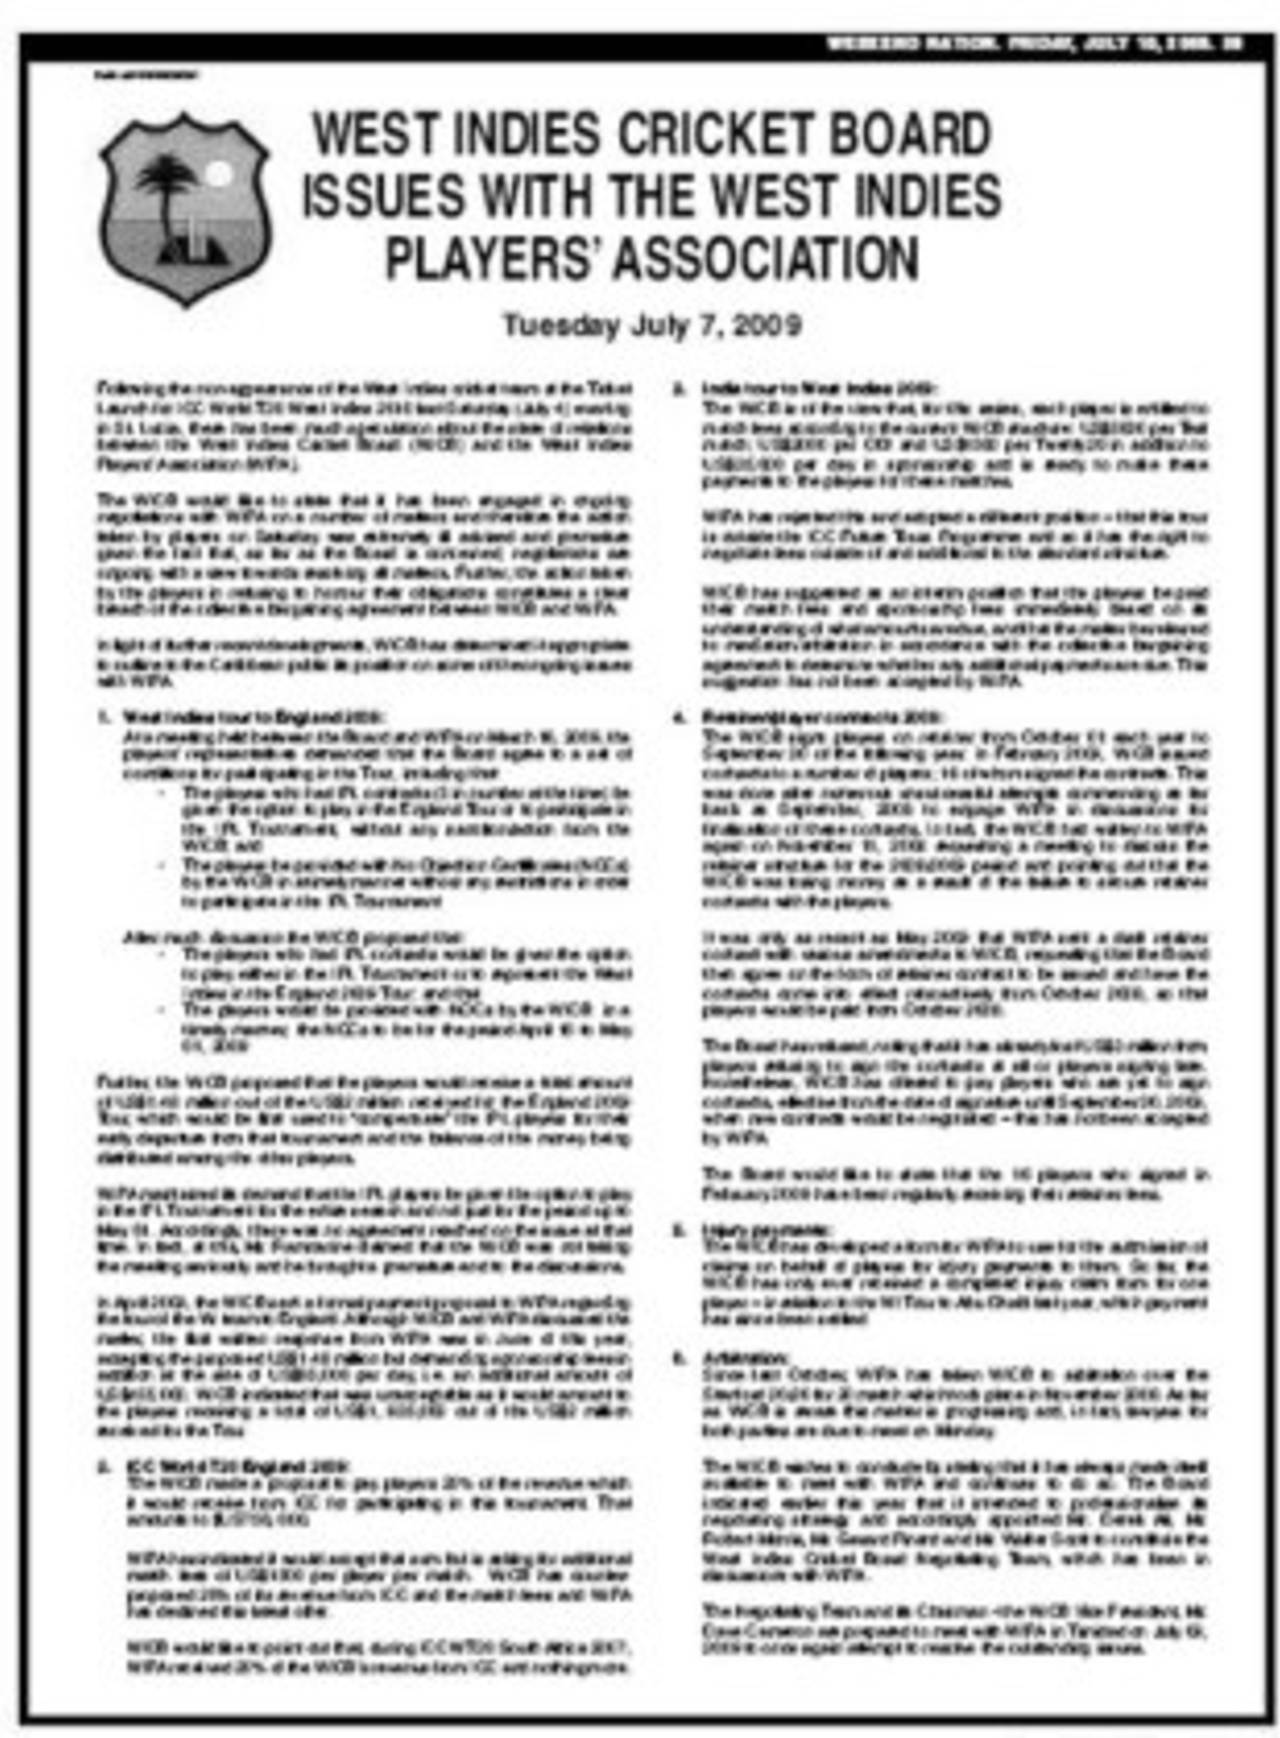 A full-page advertisement paid for by the WICB outlining its position in the dispute with the players. It appeared in newspapers throughout the Caribbean